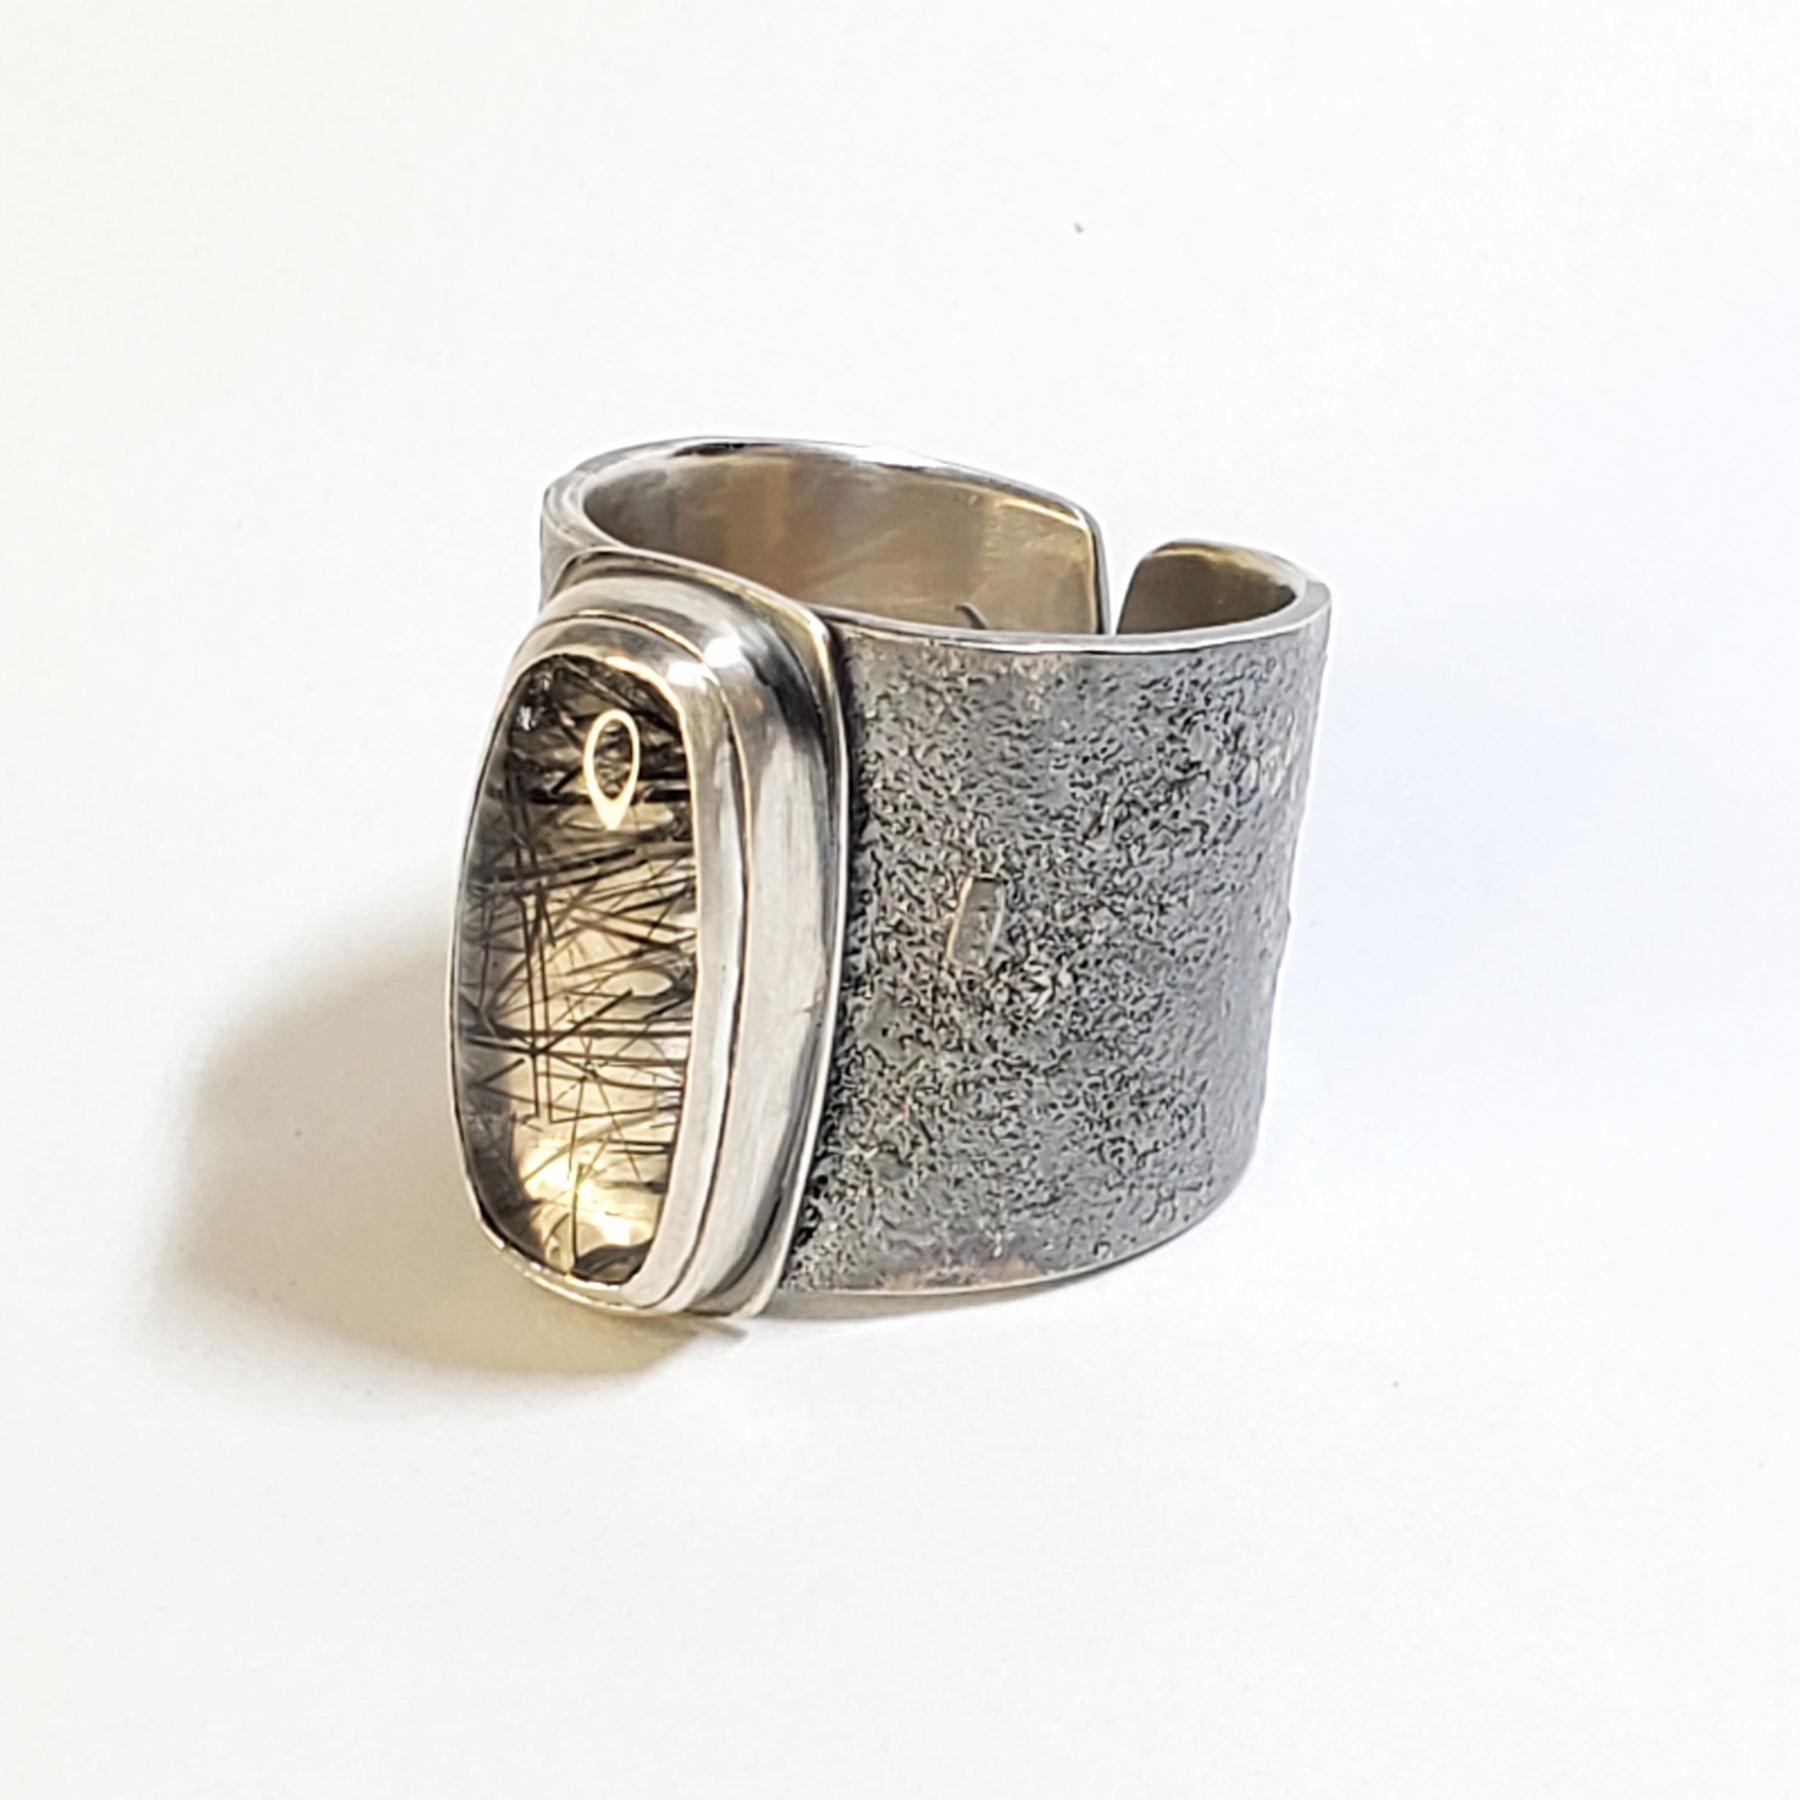 large silver textured ring with tourmaline rutile inside quartz, image courtesy of Christen Booth